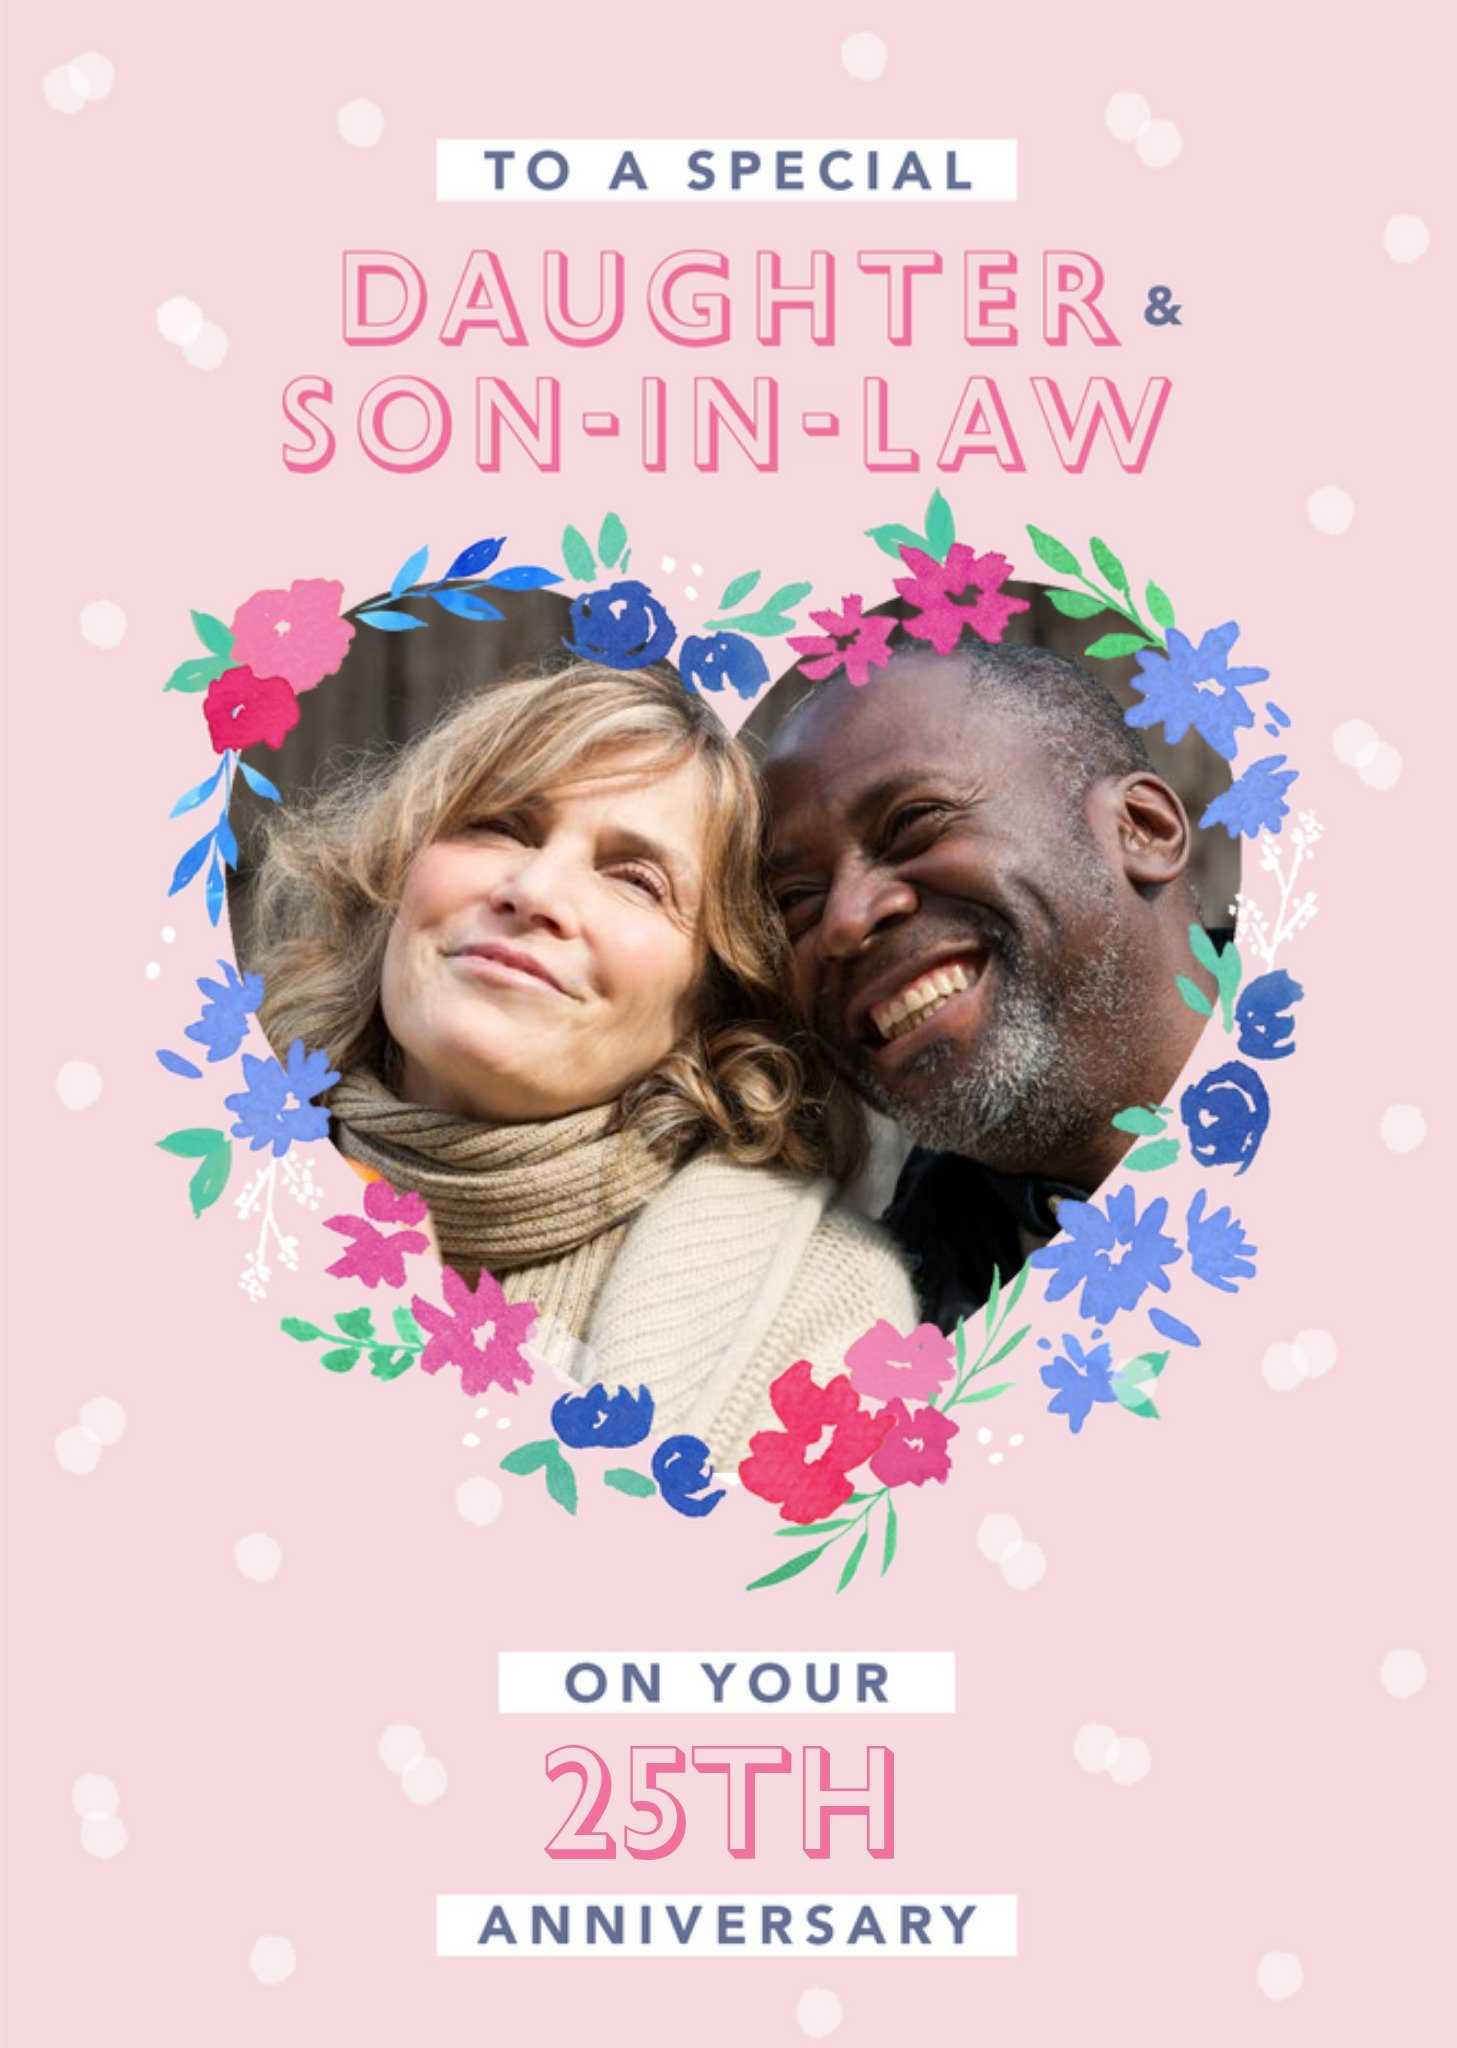 Moonpig Floral Heart Daughter And Son-In Law Photo Upload Anniversary Card Ecard